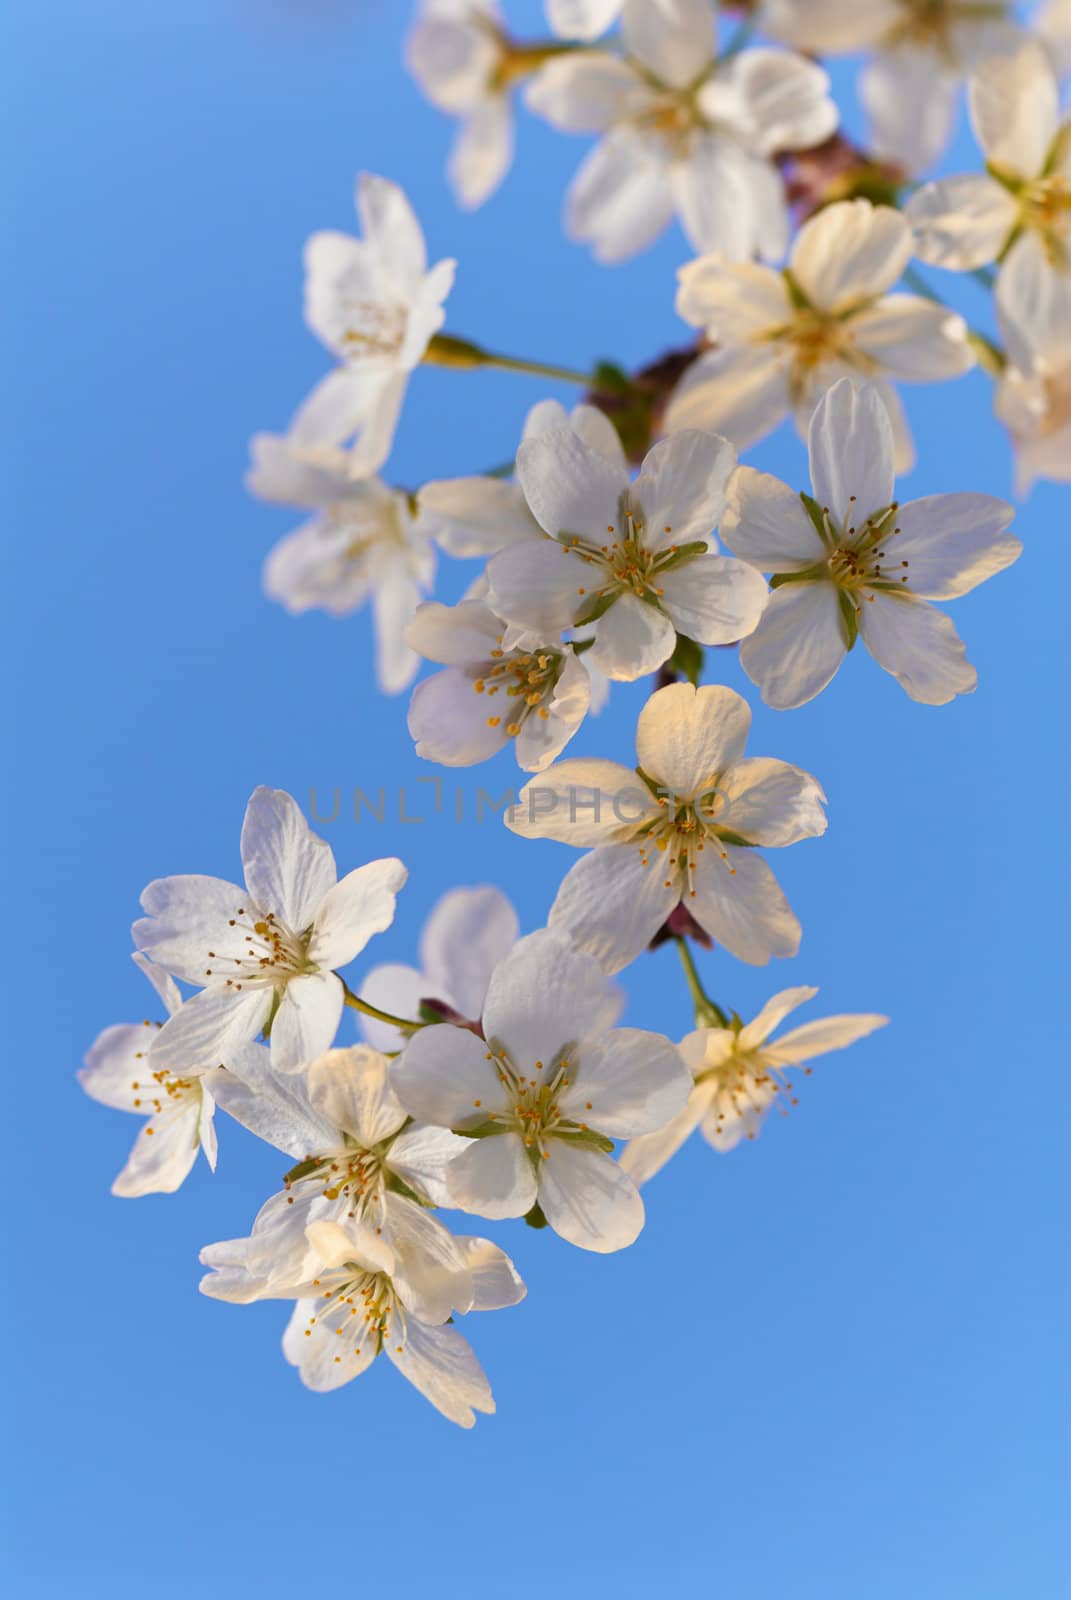 Flower of apple tree on natural blue sky background.